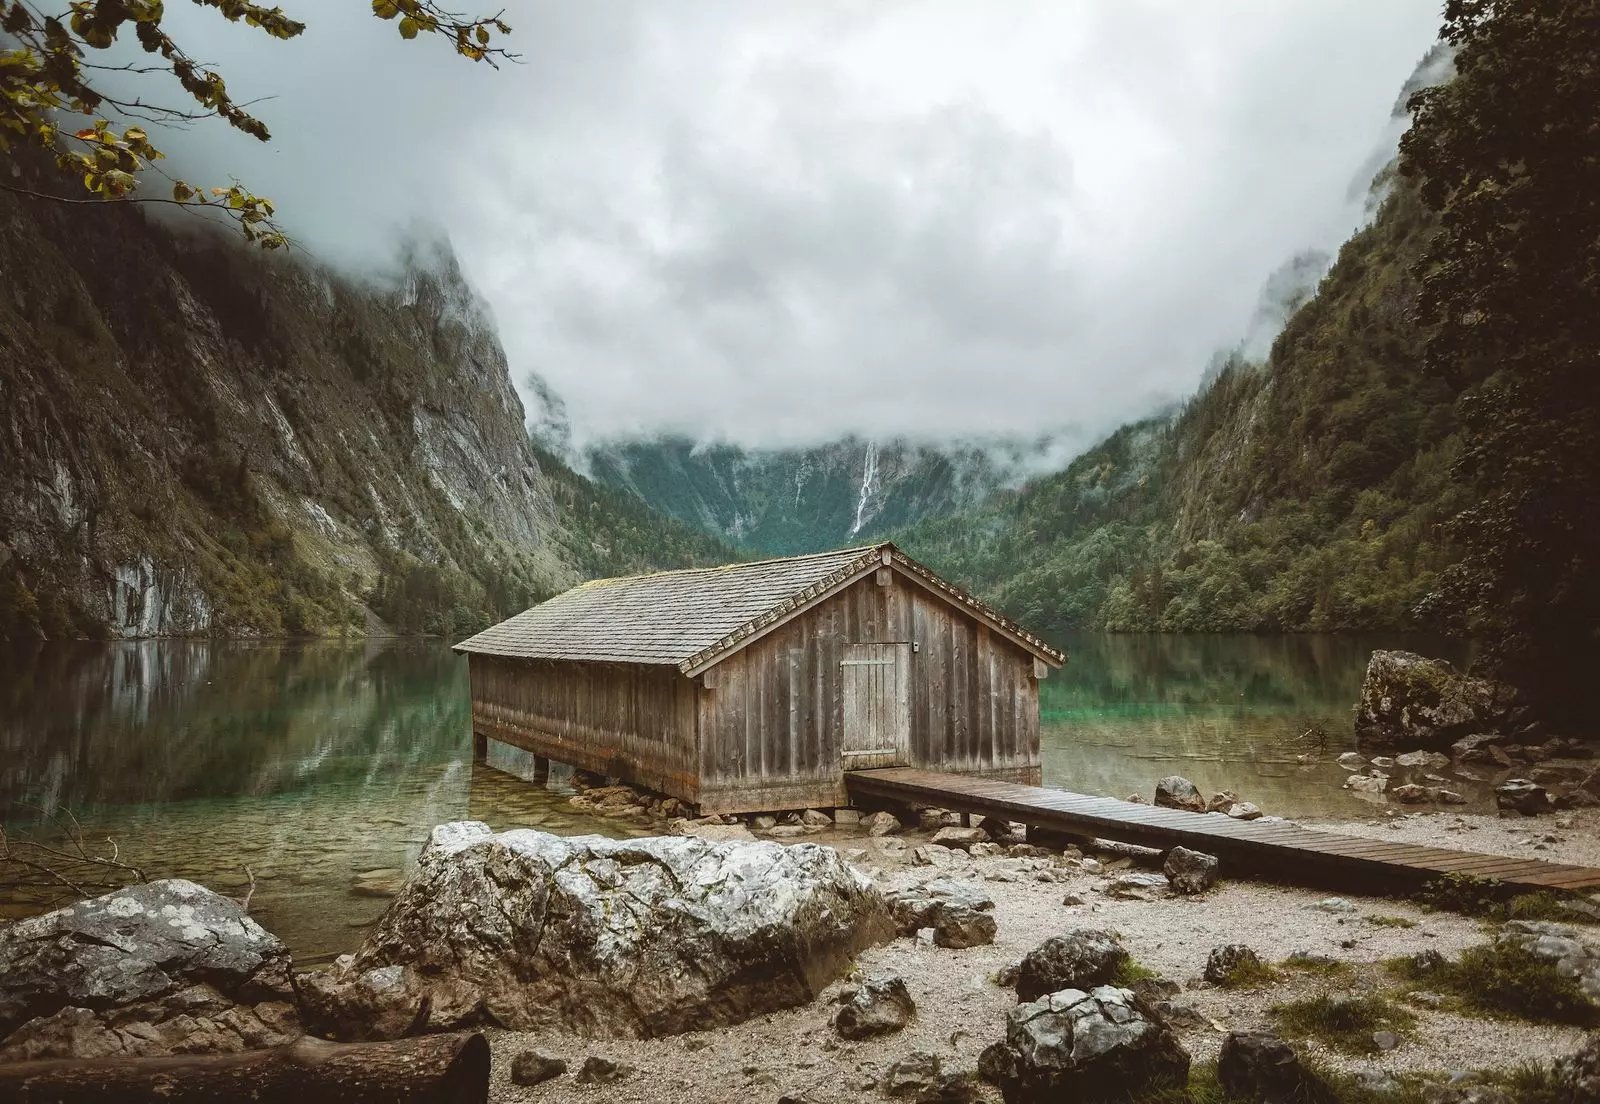 Königssee 2022 - Top 6 Attractions & Things to do